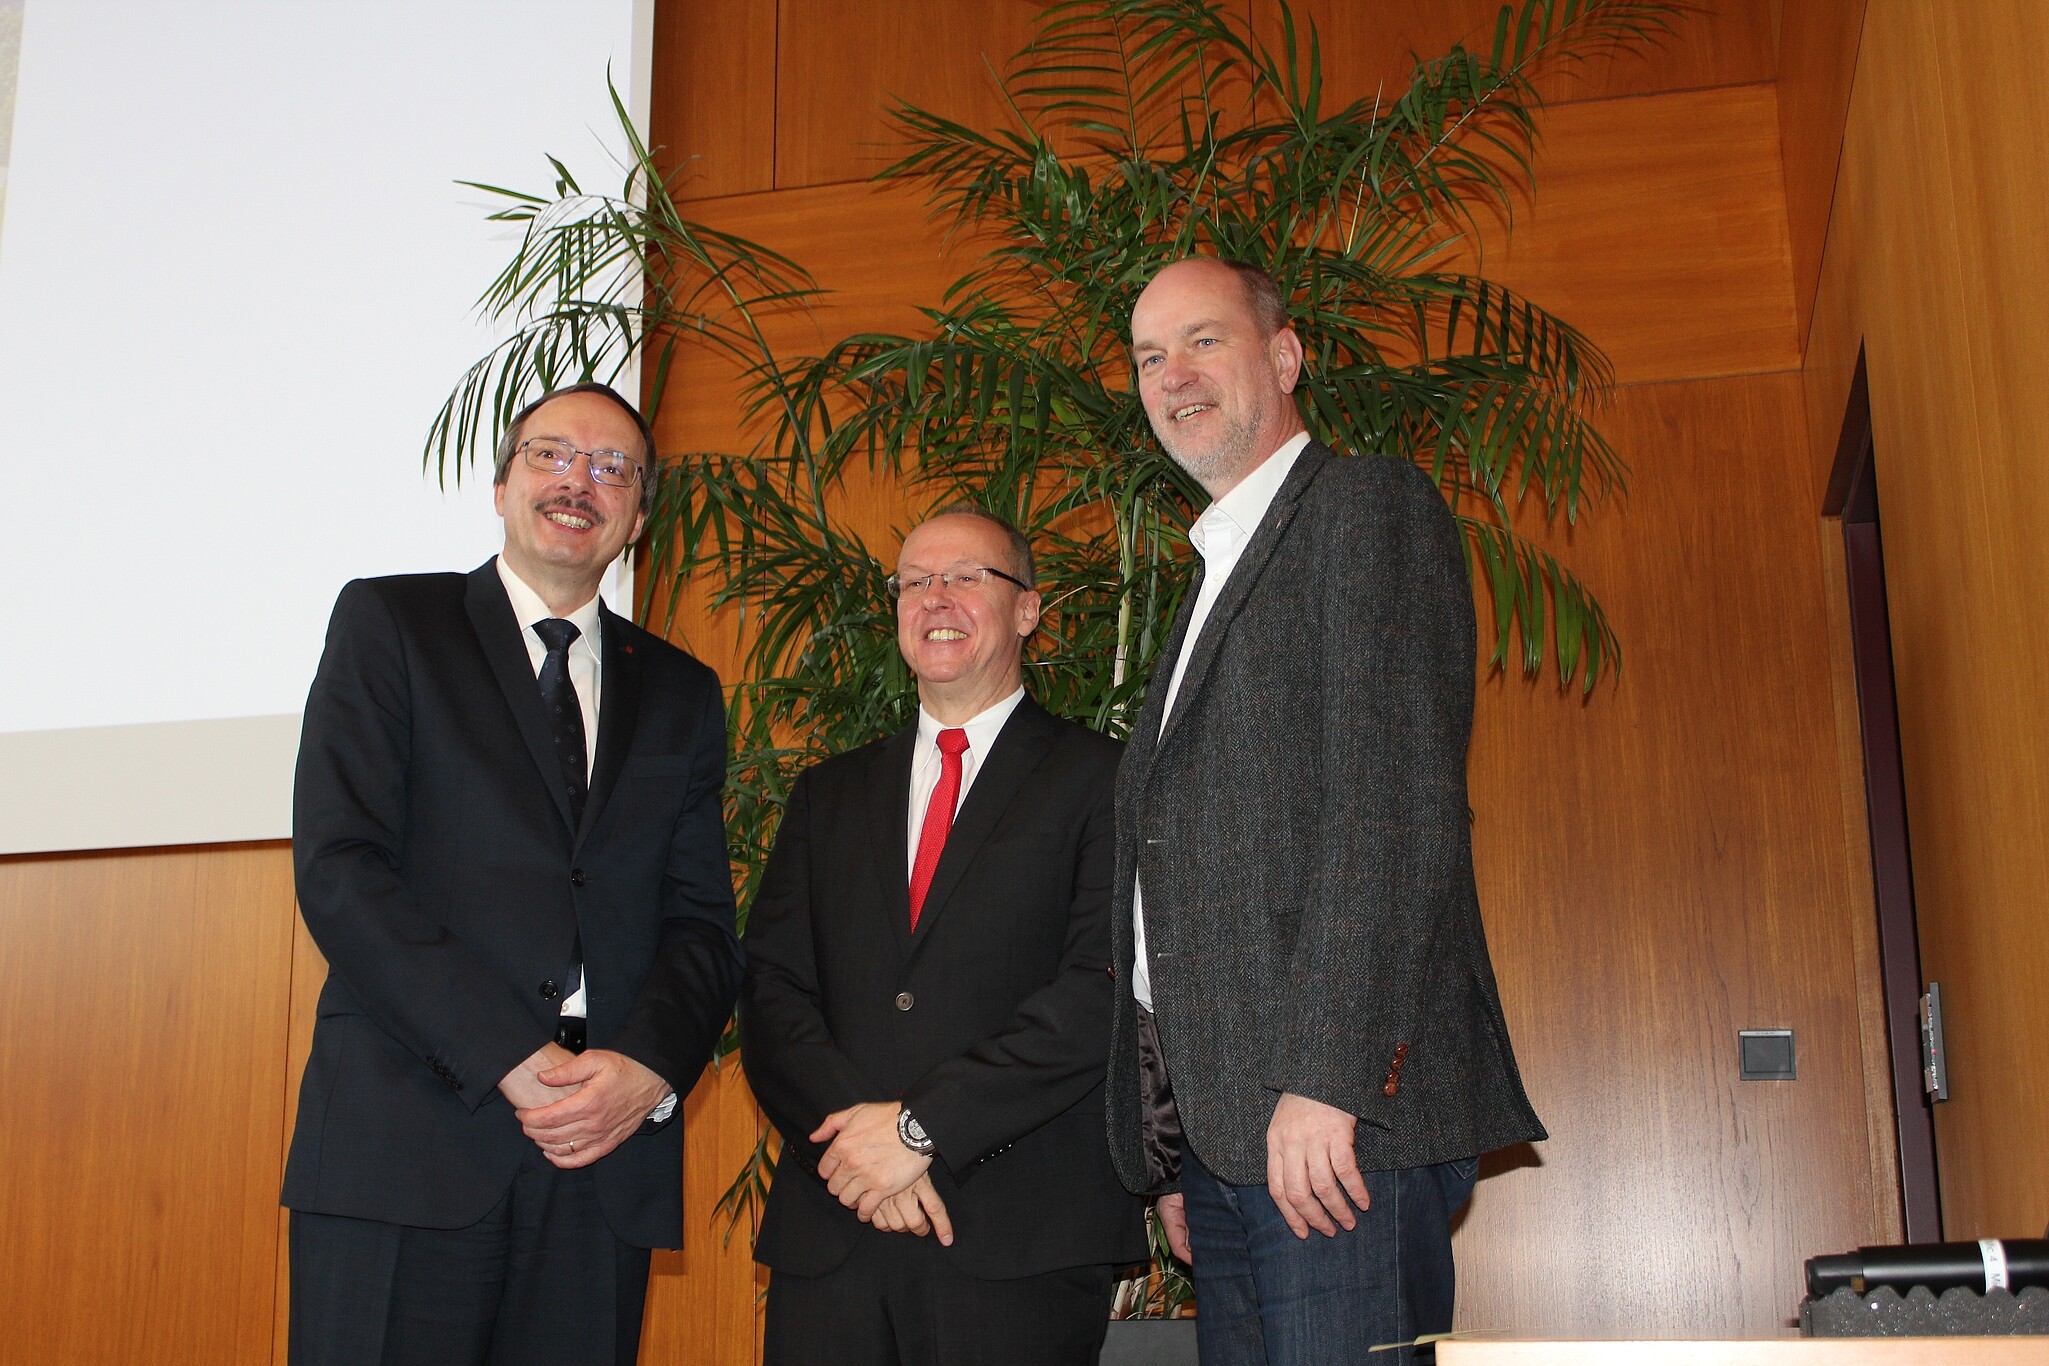 f.l. University President Prof. Dr. Peter Mudra and his two outgoing Vice Presidents, Prof. Dr. Andreas Gissel and Prof. Dr. Hans-Ulrich Dallmann